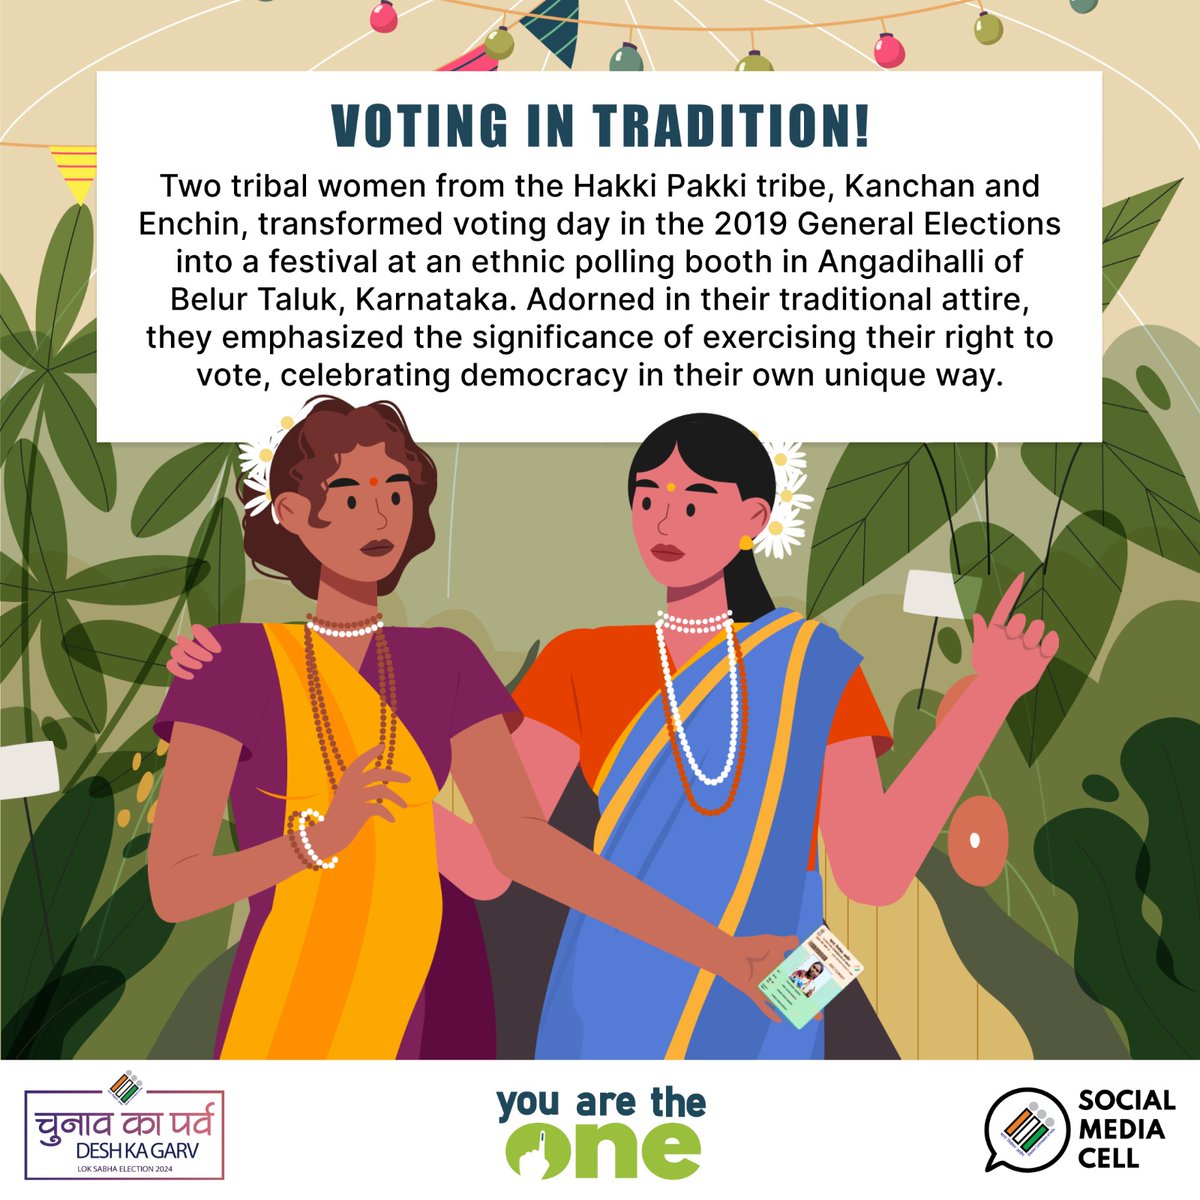 Decked up for polls 🌟✨ Who are Kanchan and Enchin, the duo who turned voting day into a festival!? Read to find out 👇 #YouAreTheOne #ChunavKaParv #DeshKaGarv #EveryVoteMatters